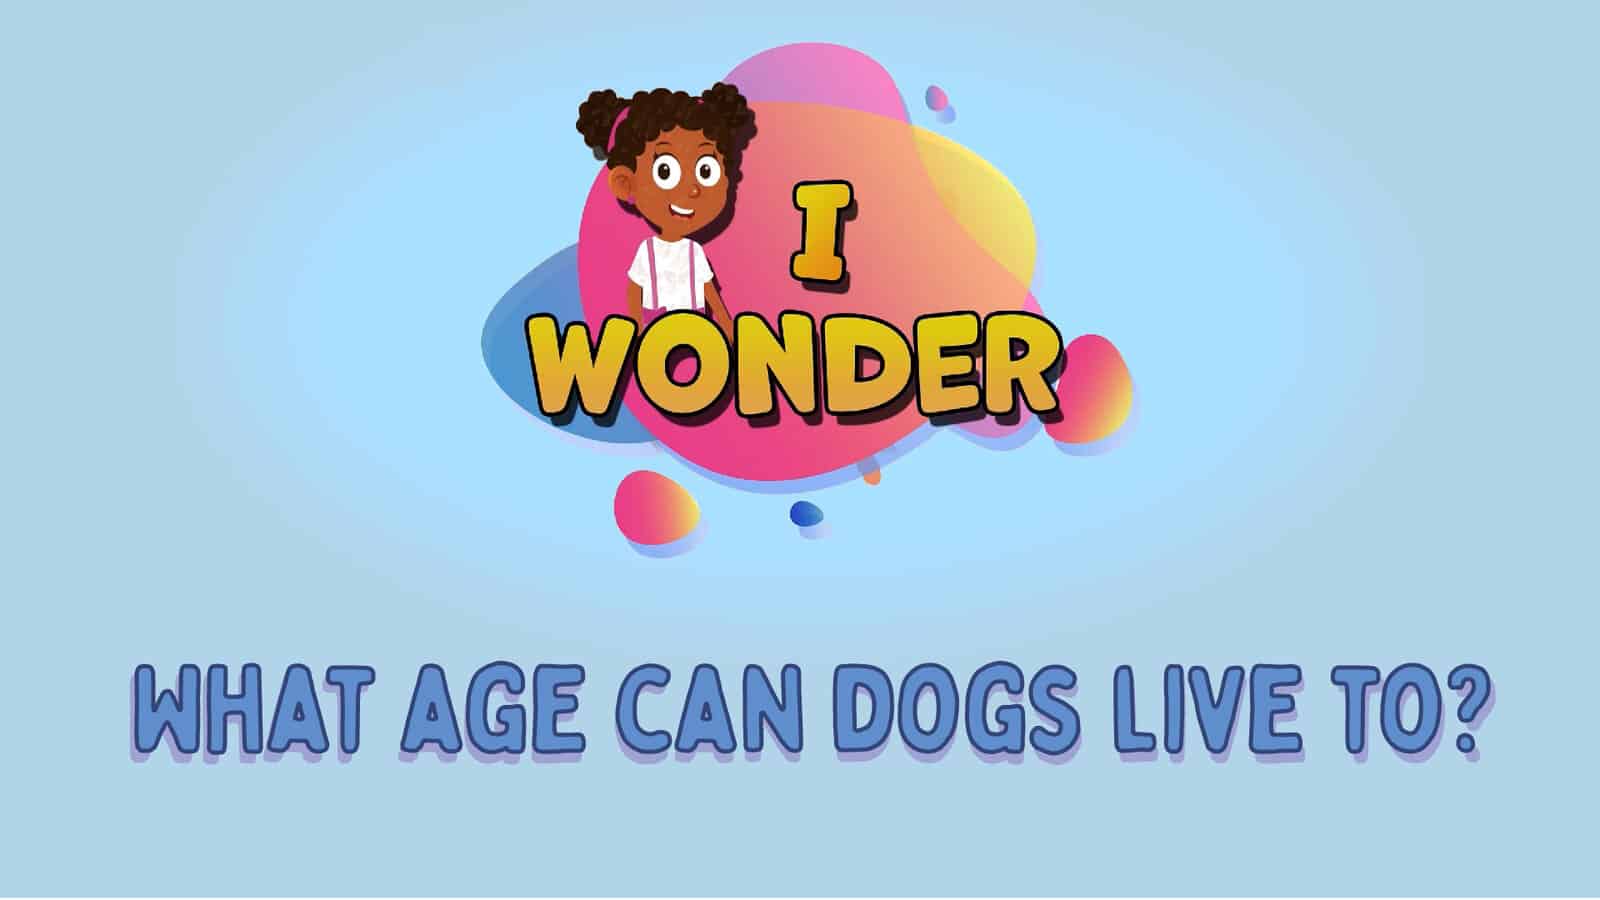 What Age Can Dogs Live To?